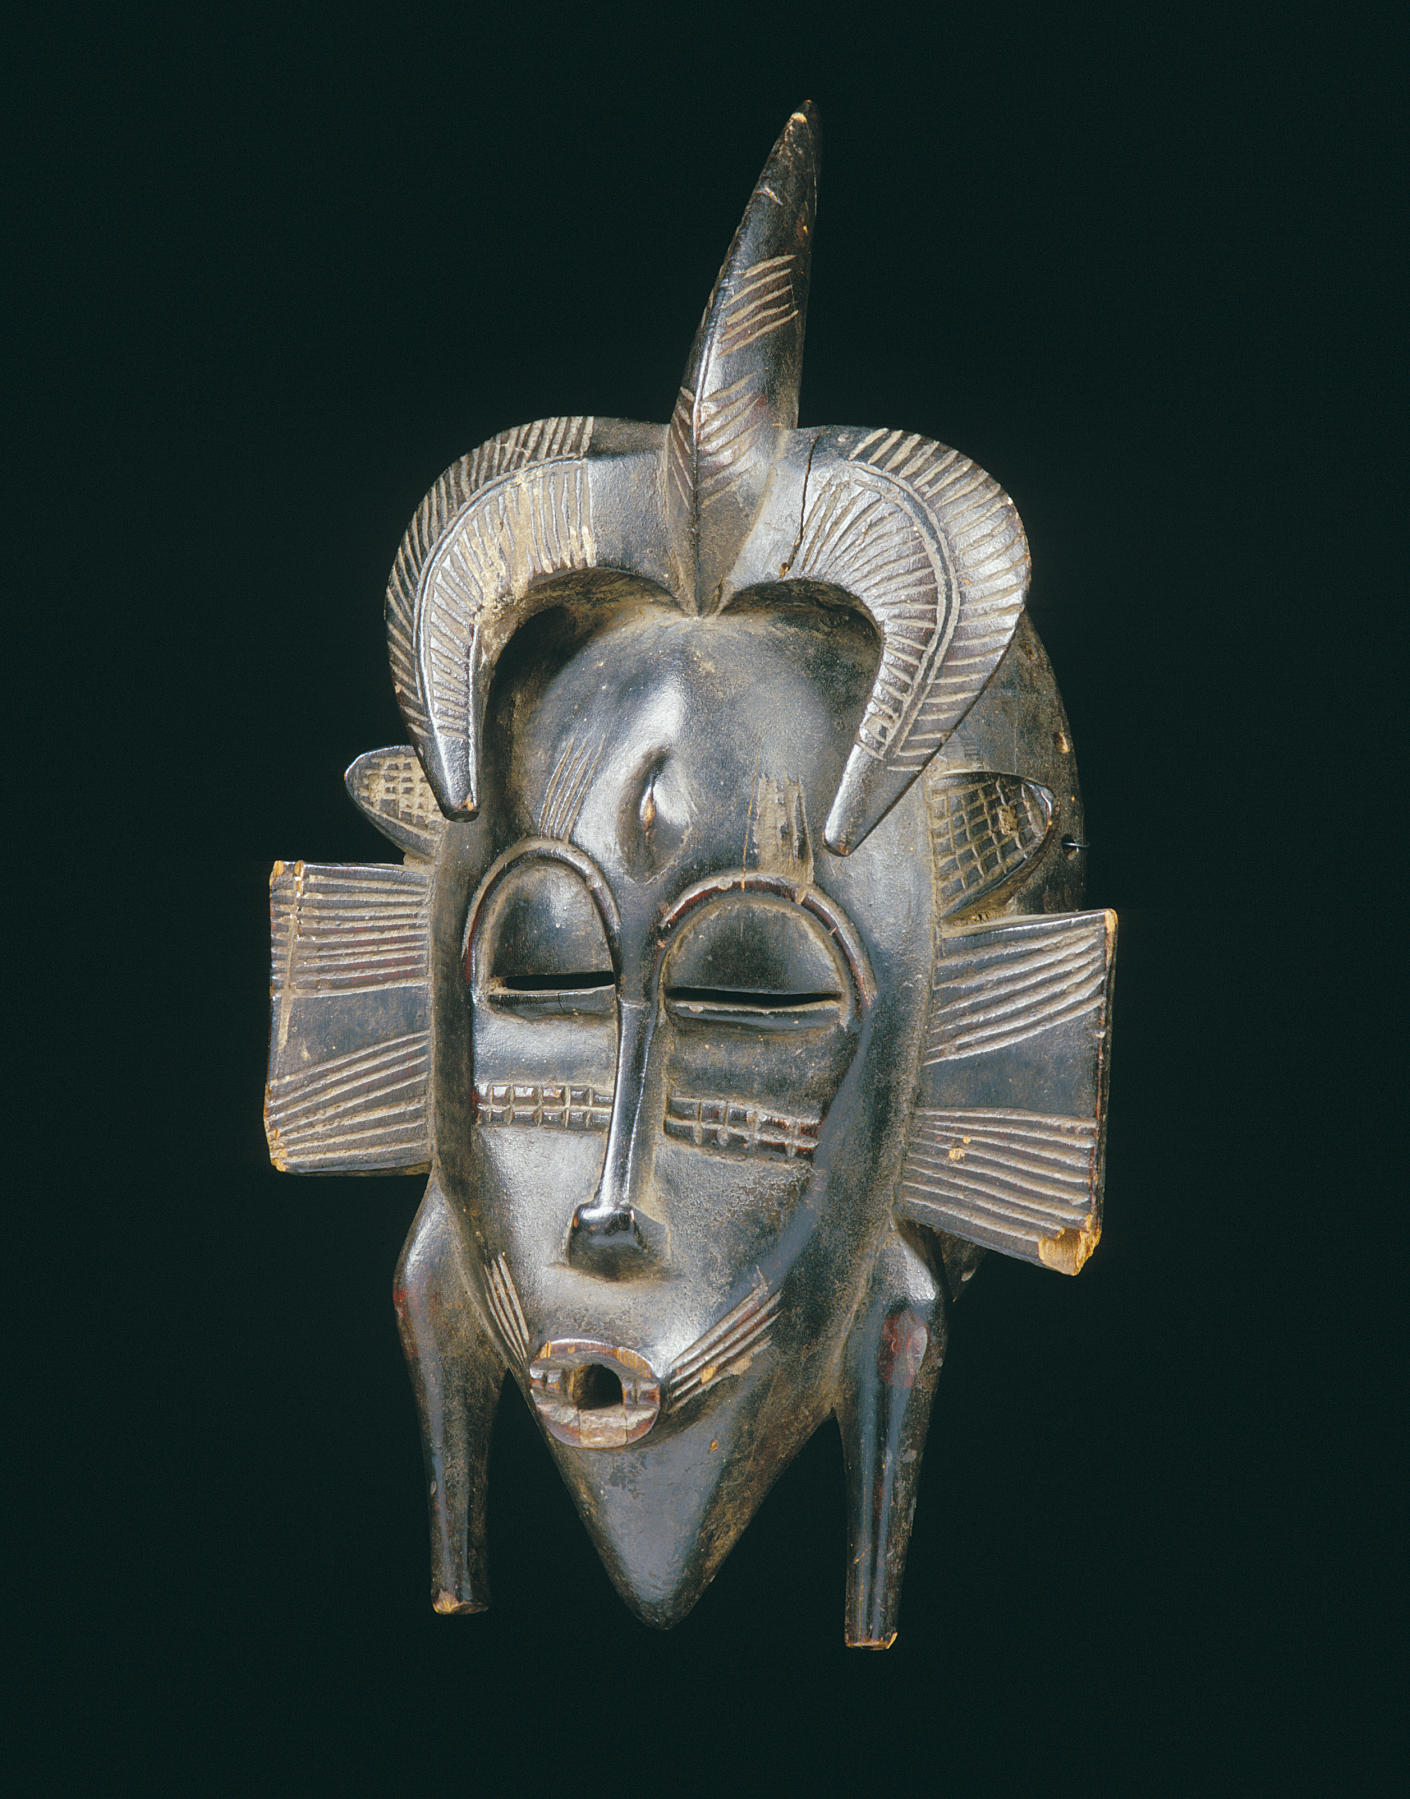 A Senufo facemask, Kpellie